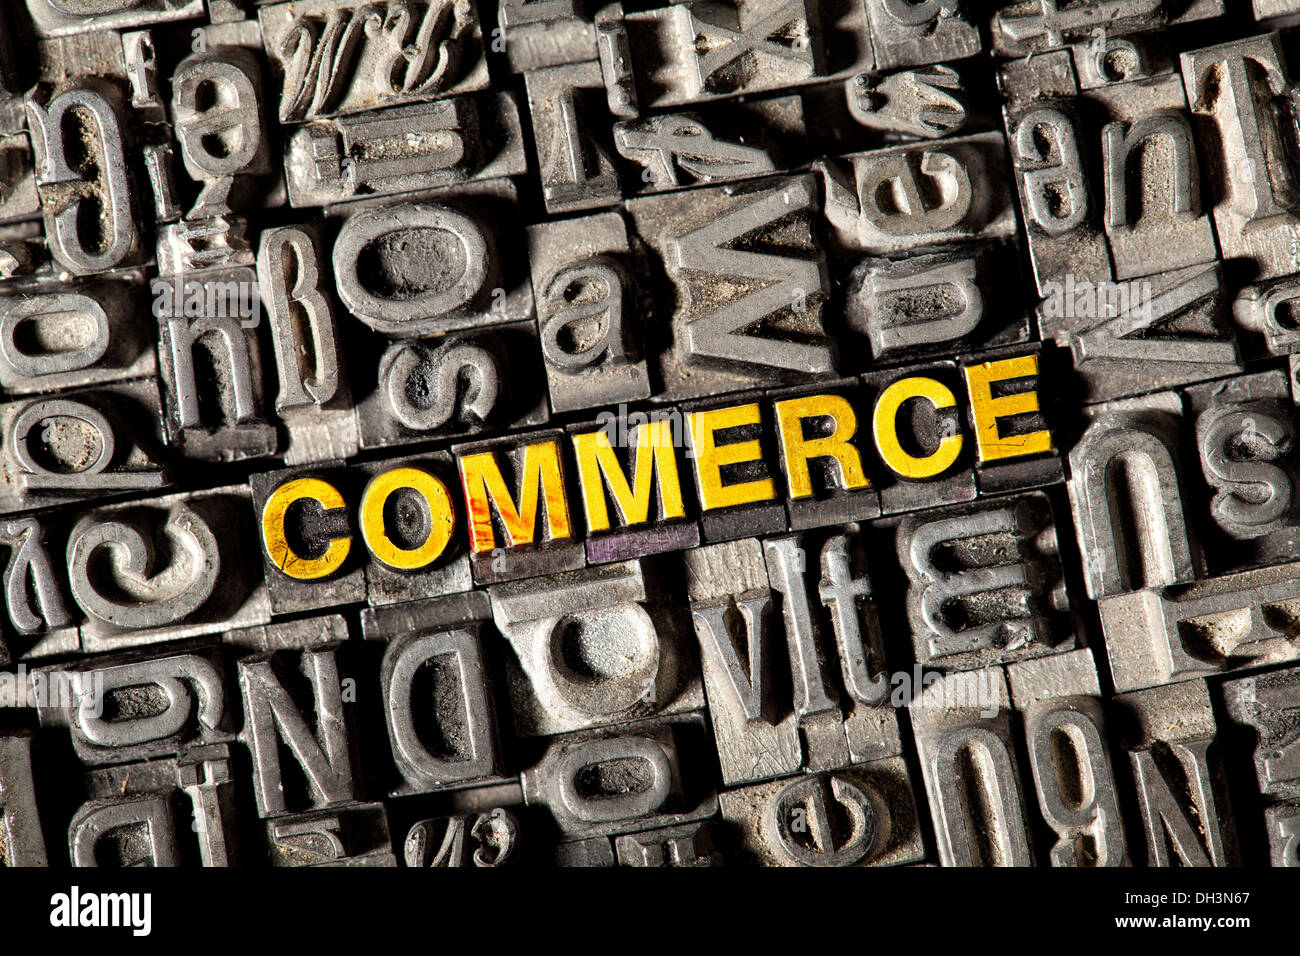 Old lead letters forming the word COMMERCE Stock Photo